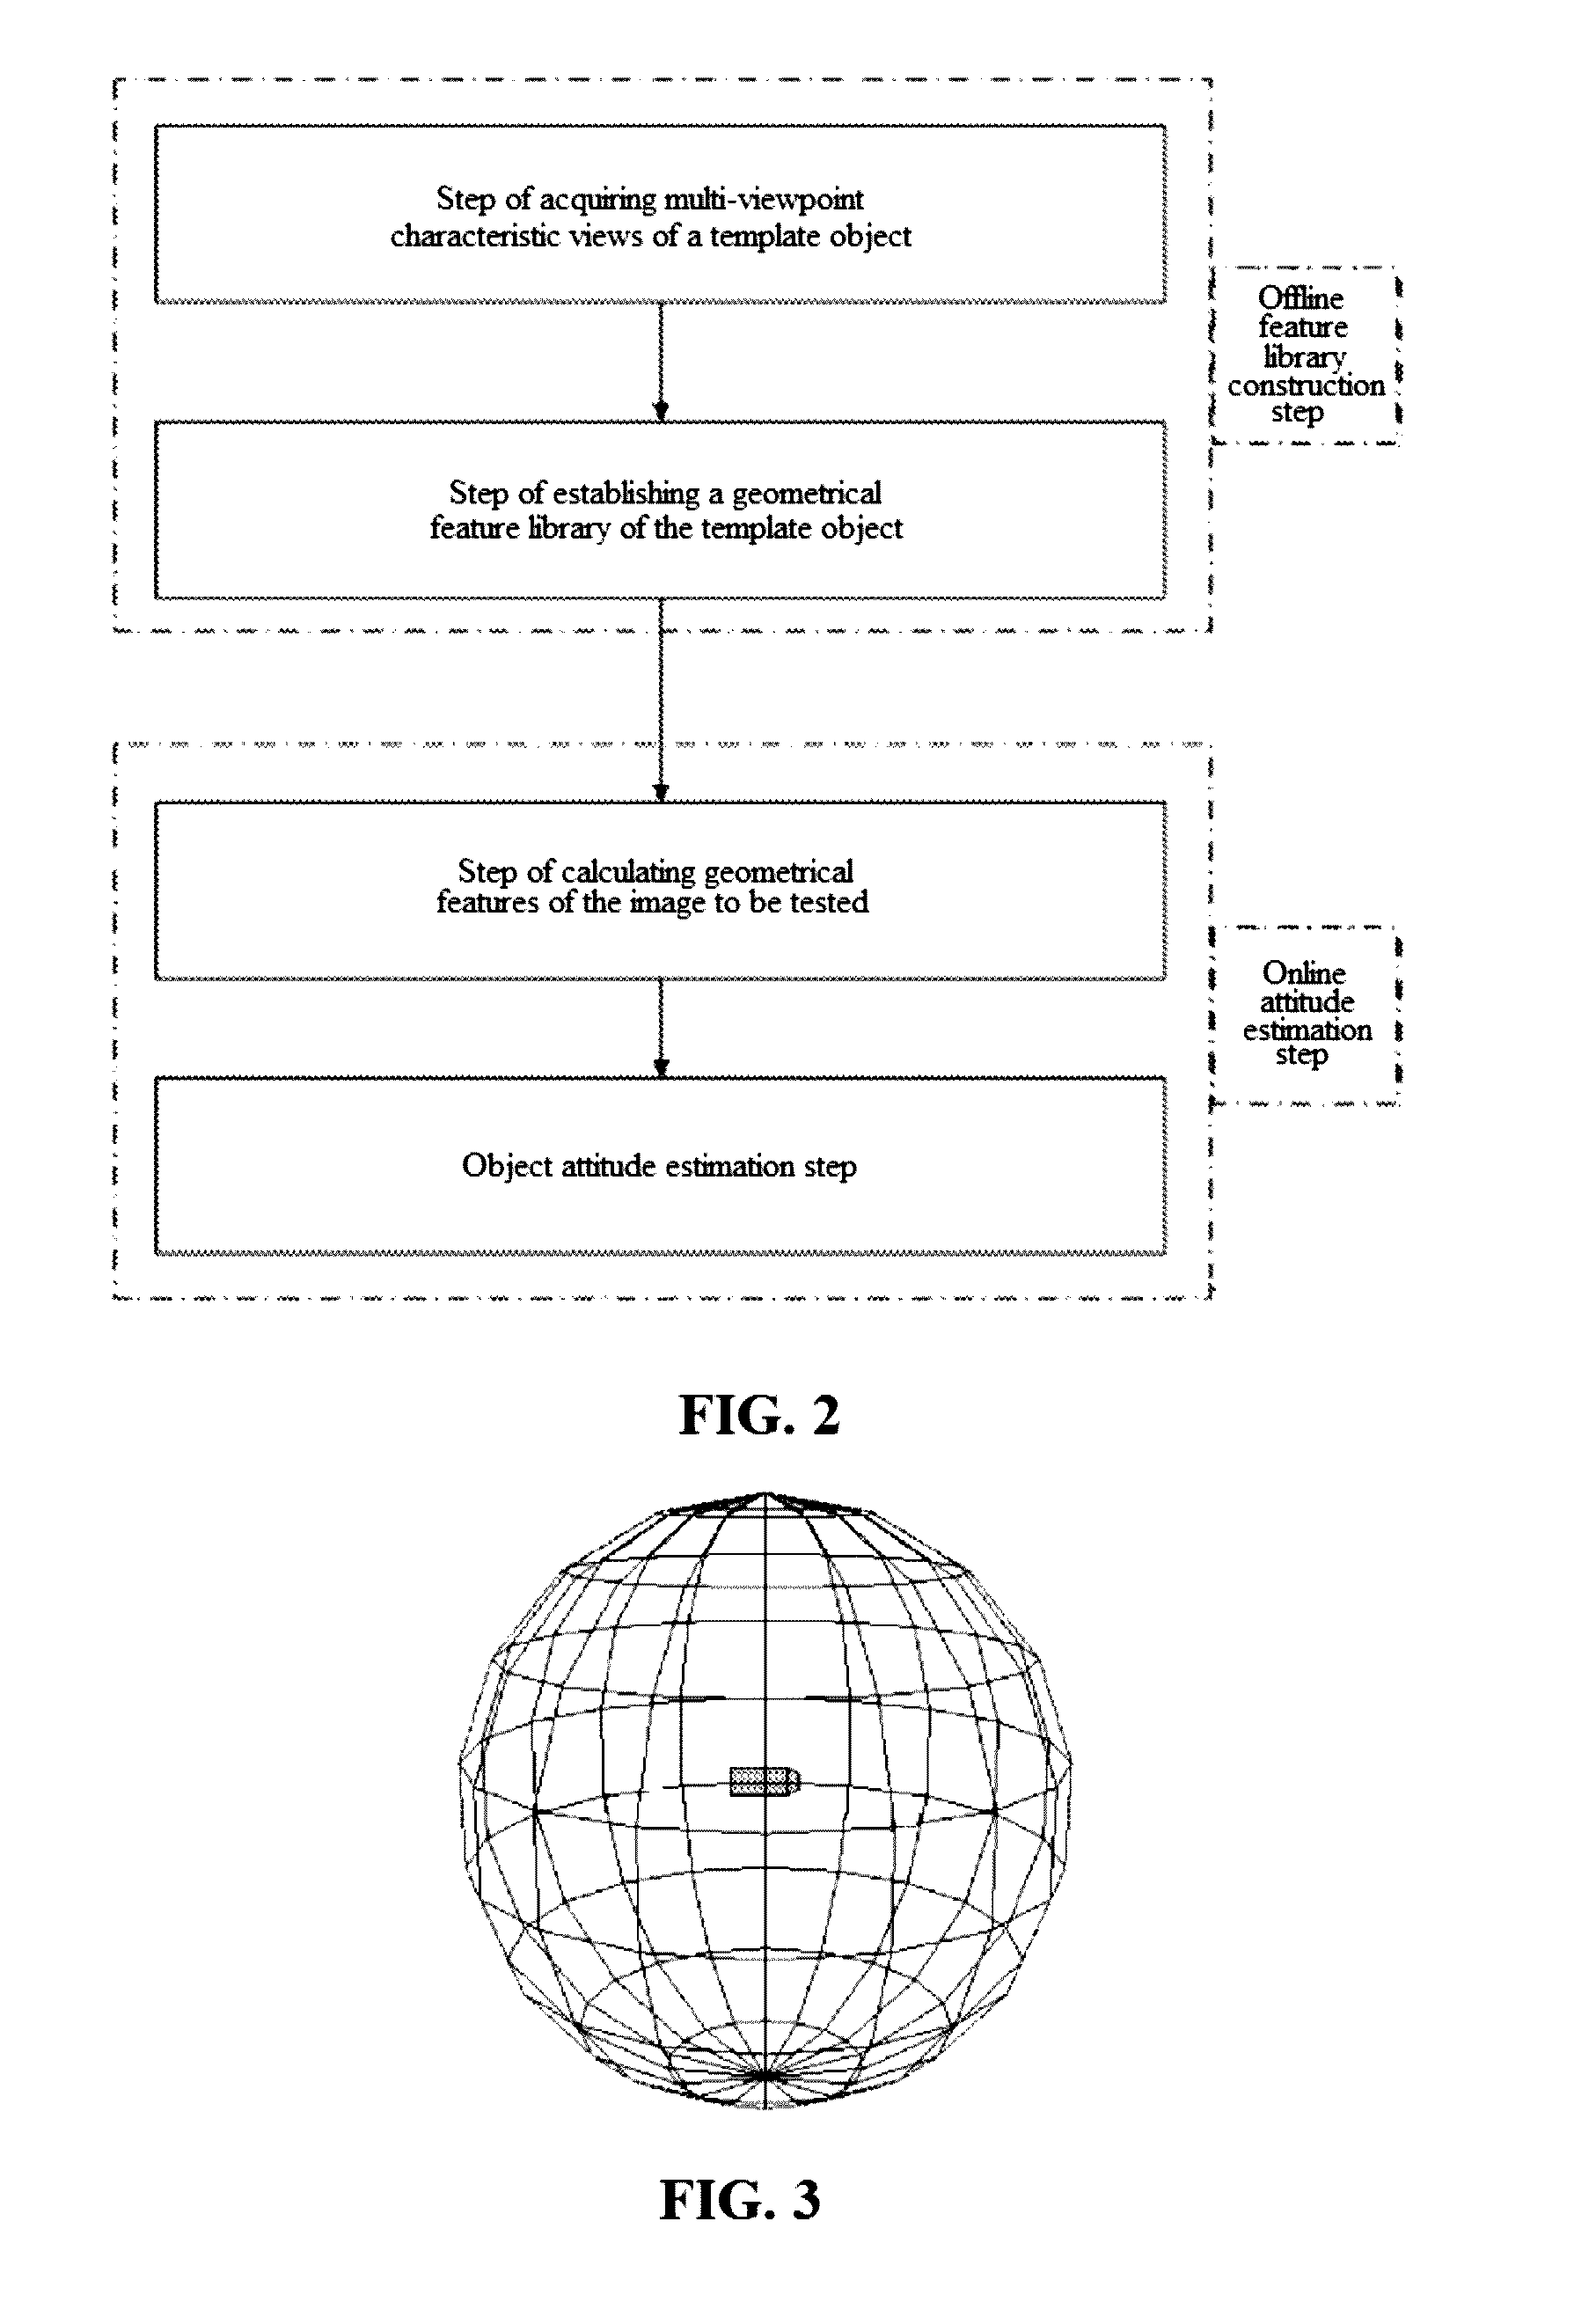 Attitude estimation method and system for on-orbit three-dimensional space object under model restraint